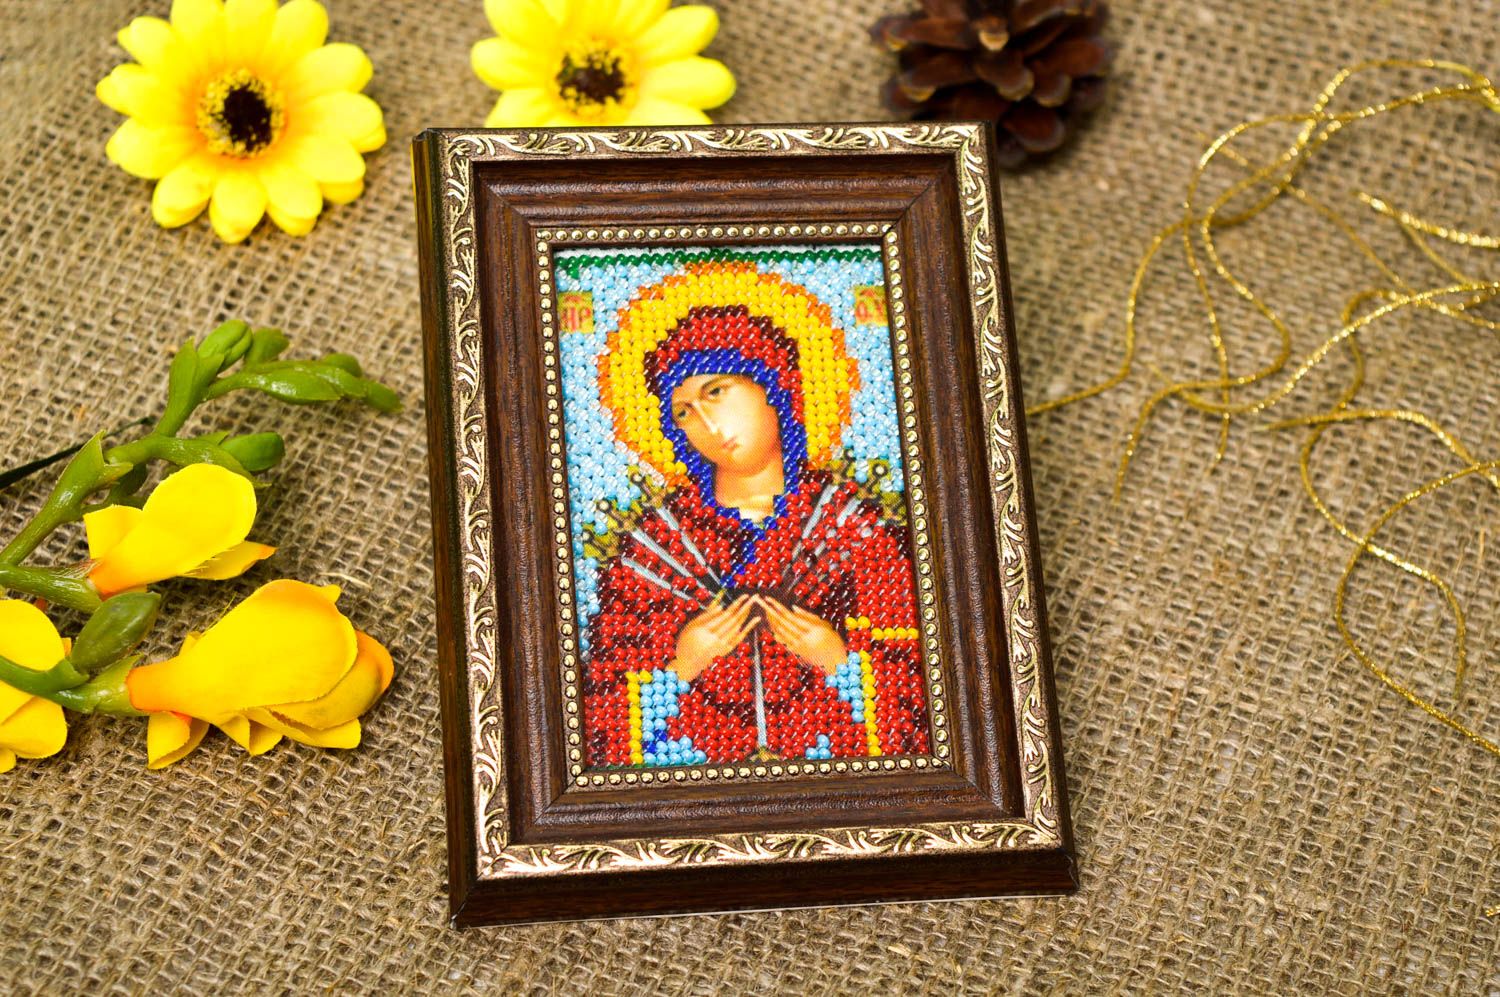 Homemade home decor bead embroidered icons orthodox icons for decorative use photo 1